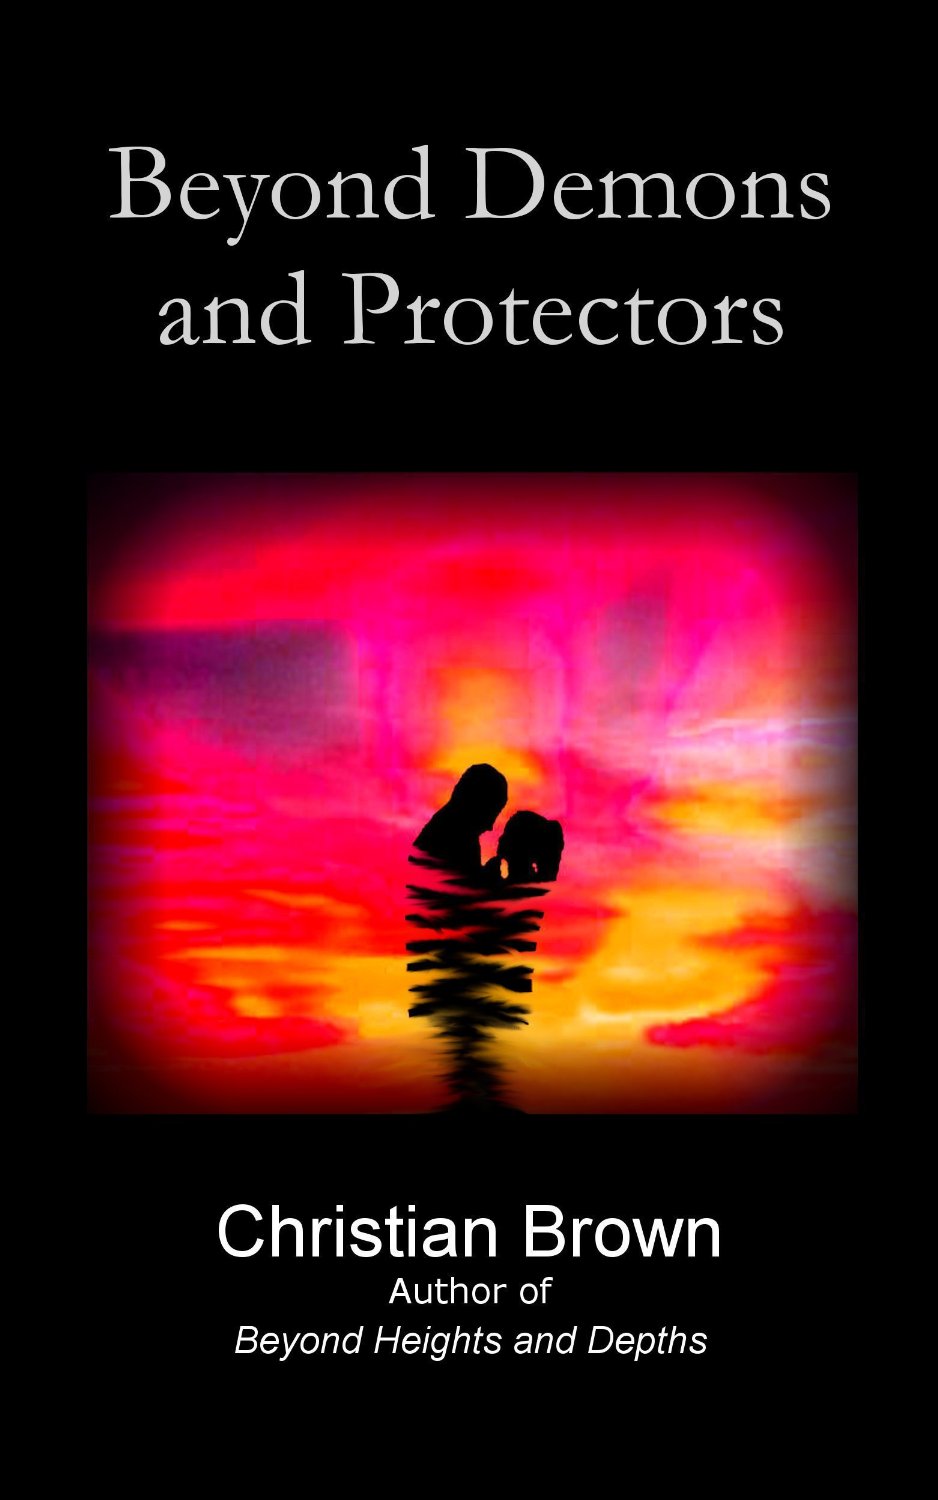 Beyond Demons and Protectors by Christian Brown